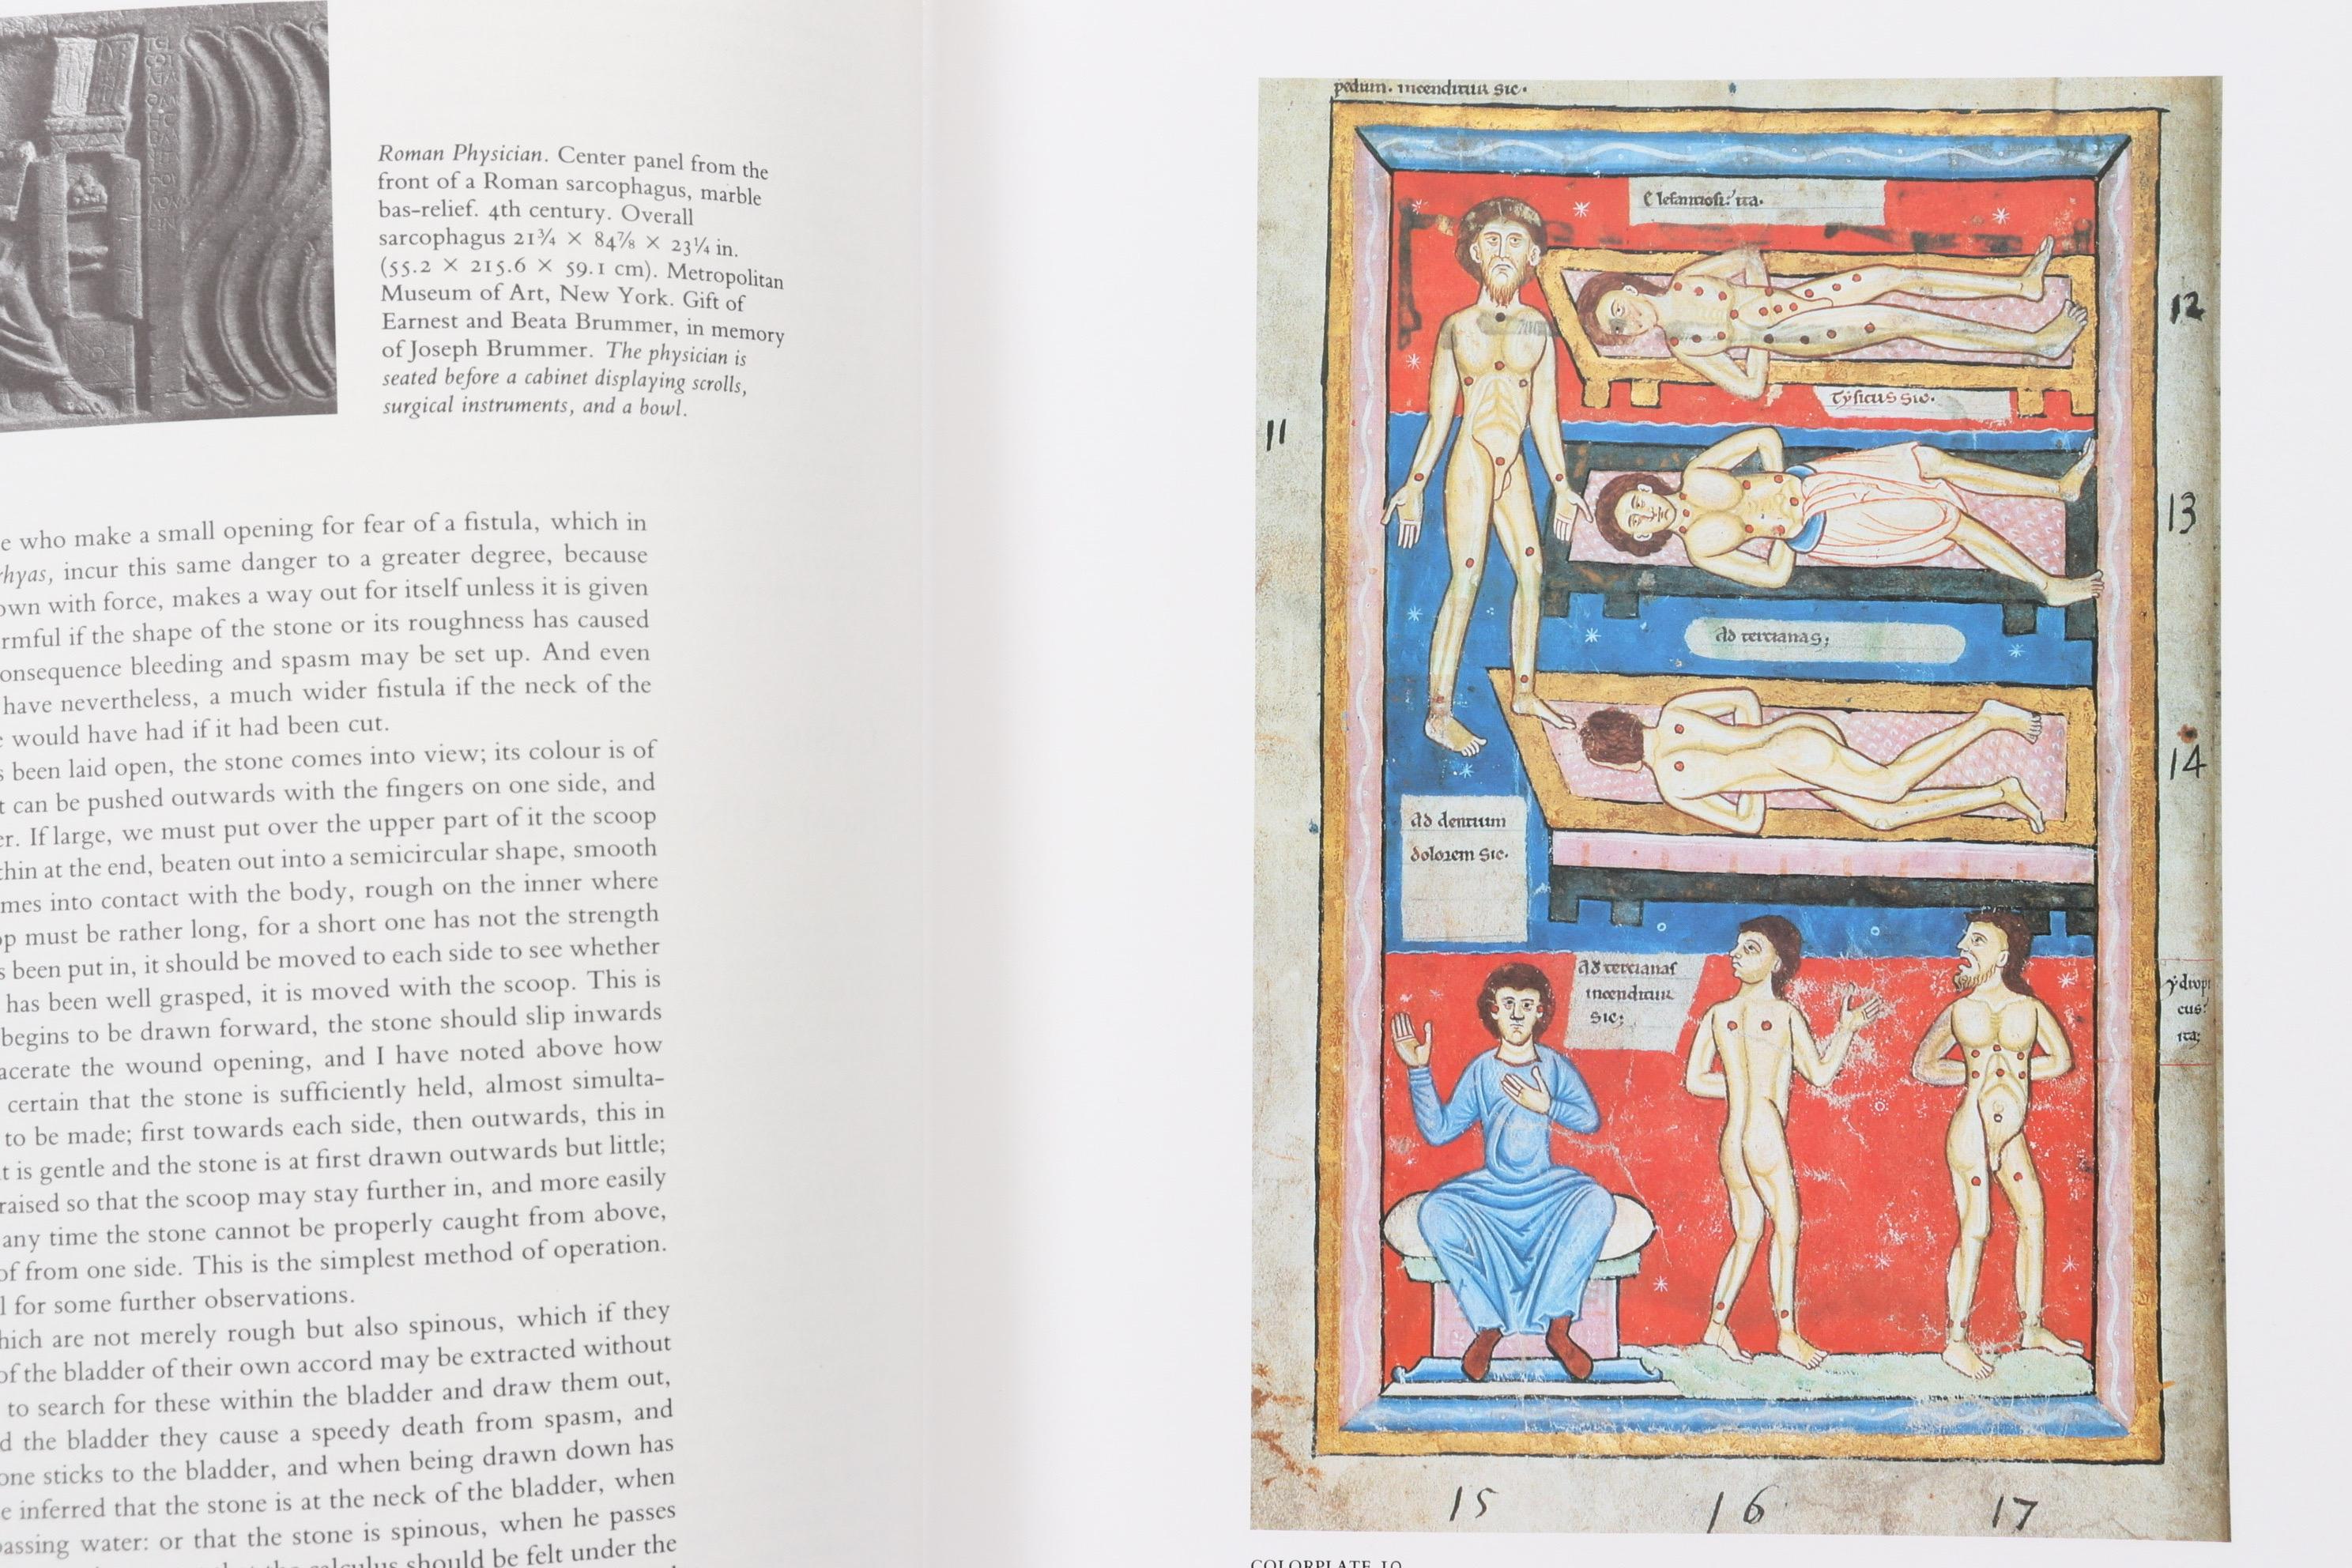 Medicine, a Treasury of Art and Literature. Edited by Ann G. Carmichael and Richard M. Ratzan. Published by Beaux Arts Editions in 1991. Hardcover book with dustjacket. 235 illustrations, 145 in full color, 376 pages.